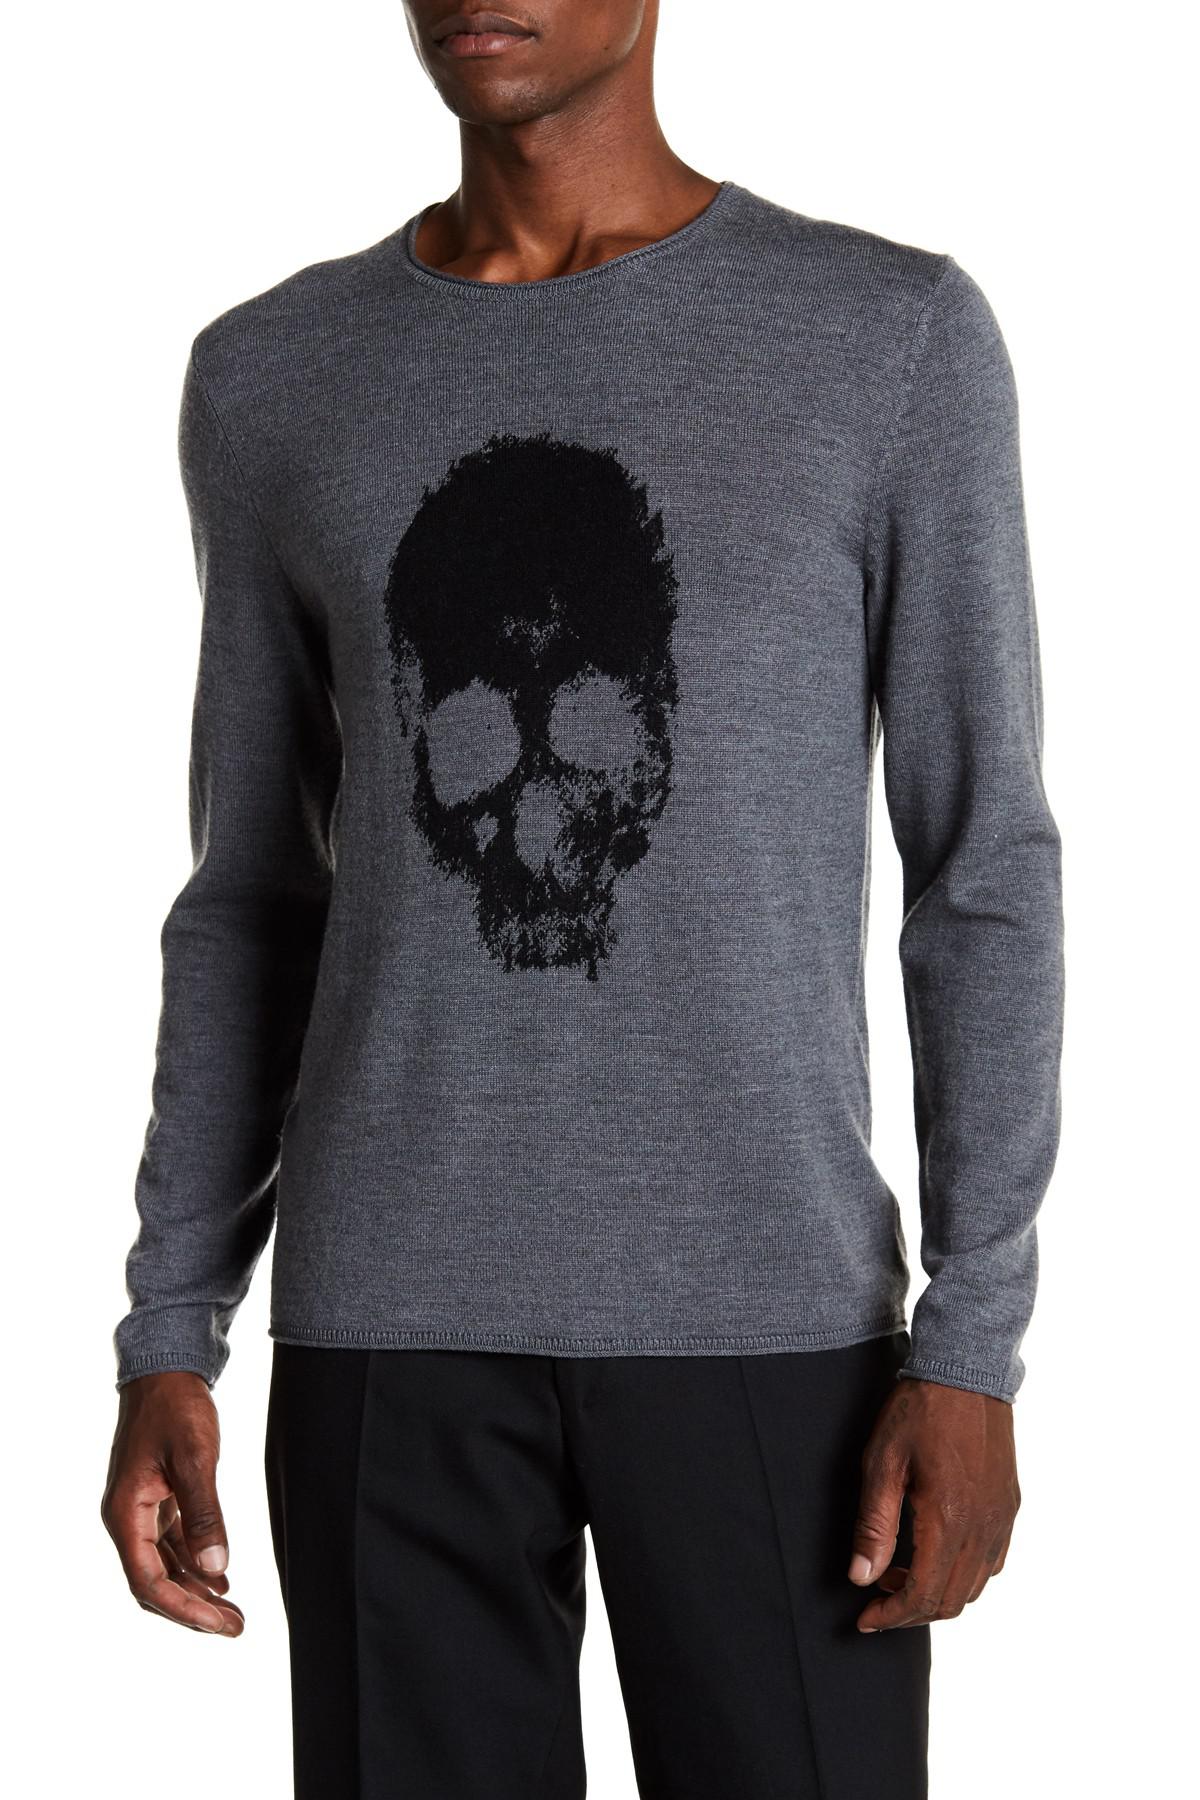 The Kooples Printed Skull Sweater in Gray for Men - Lyst